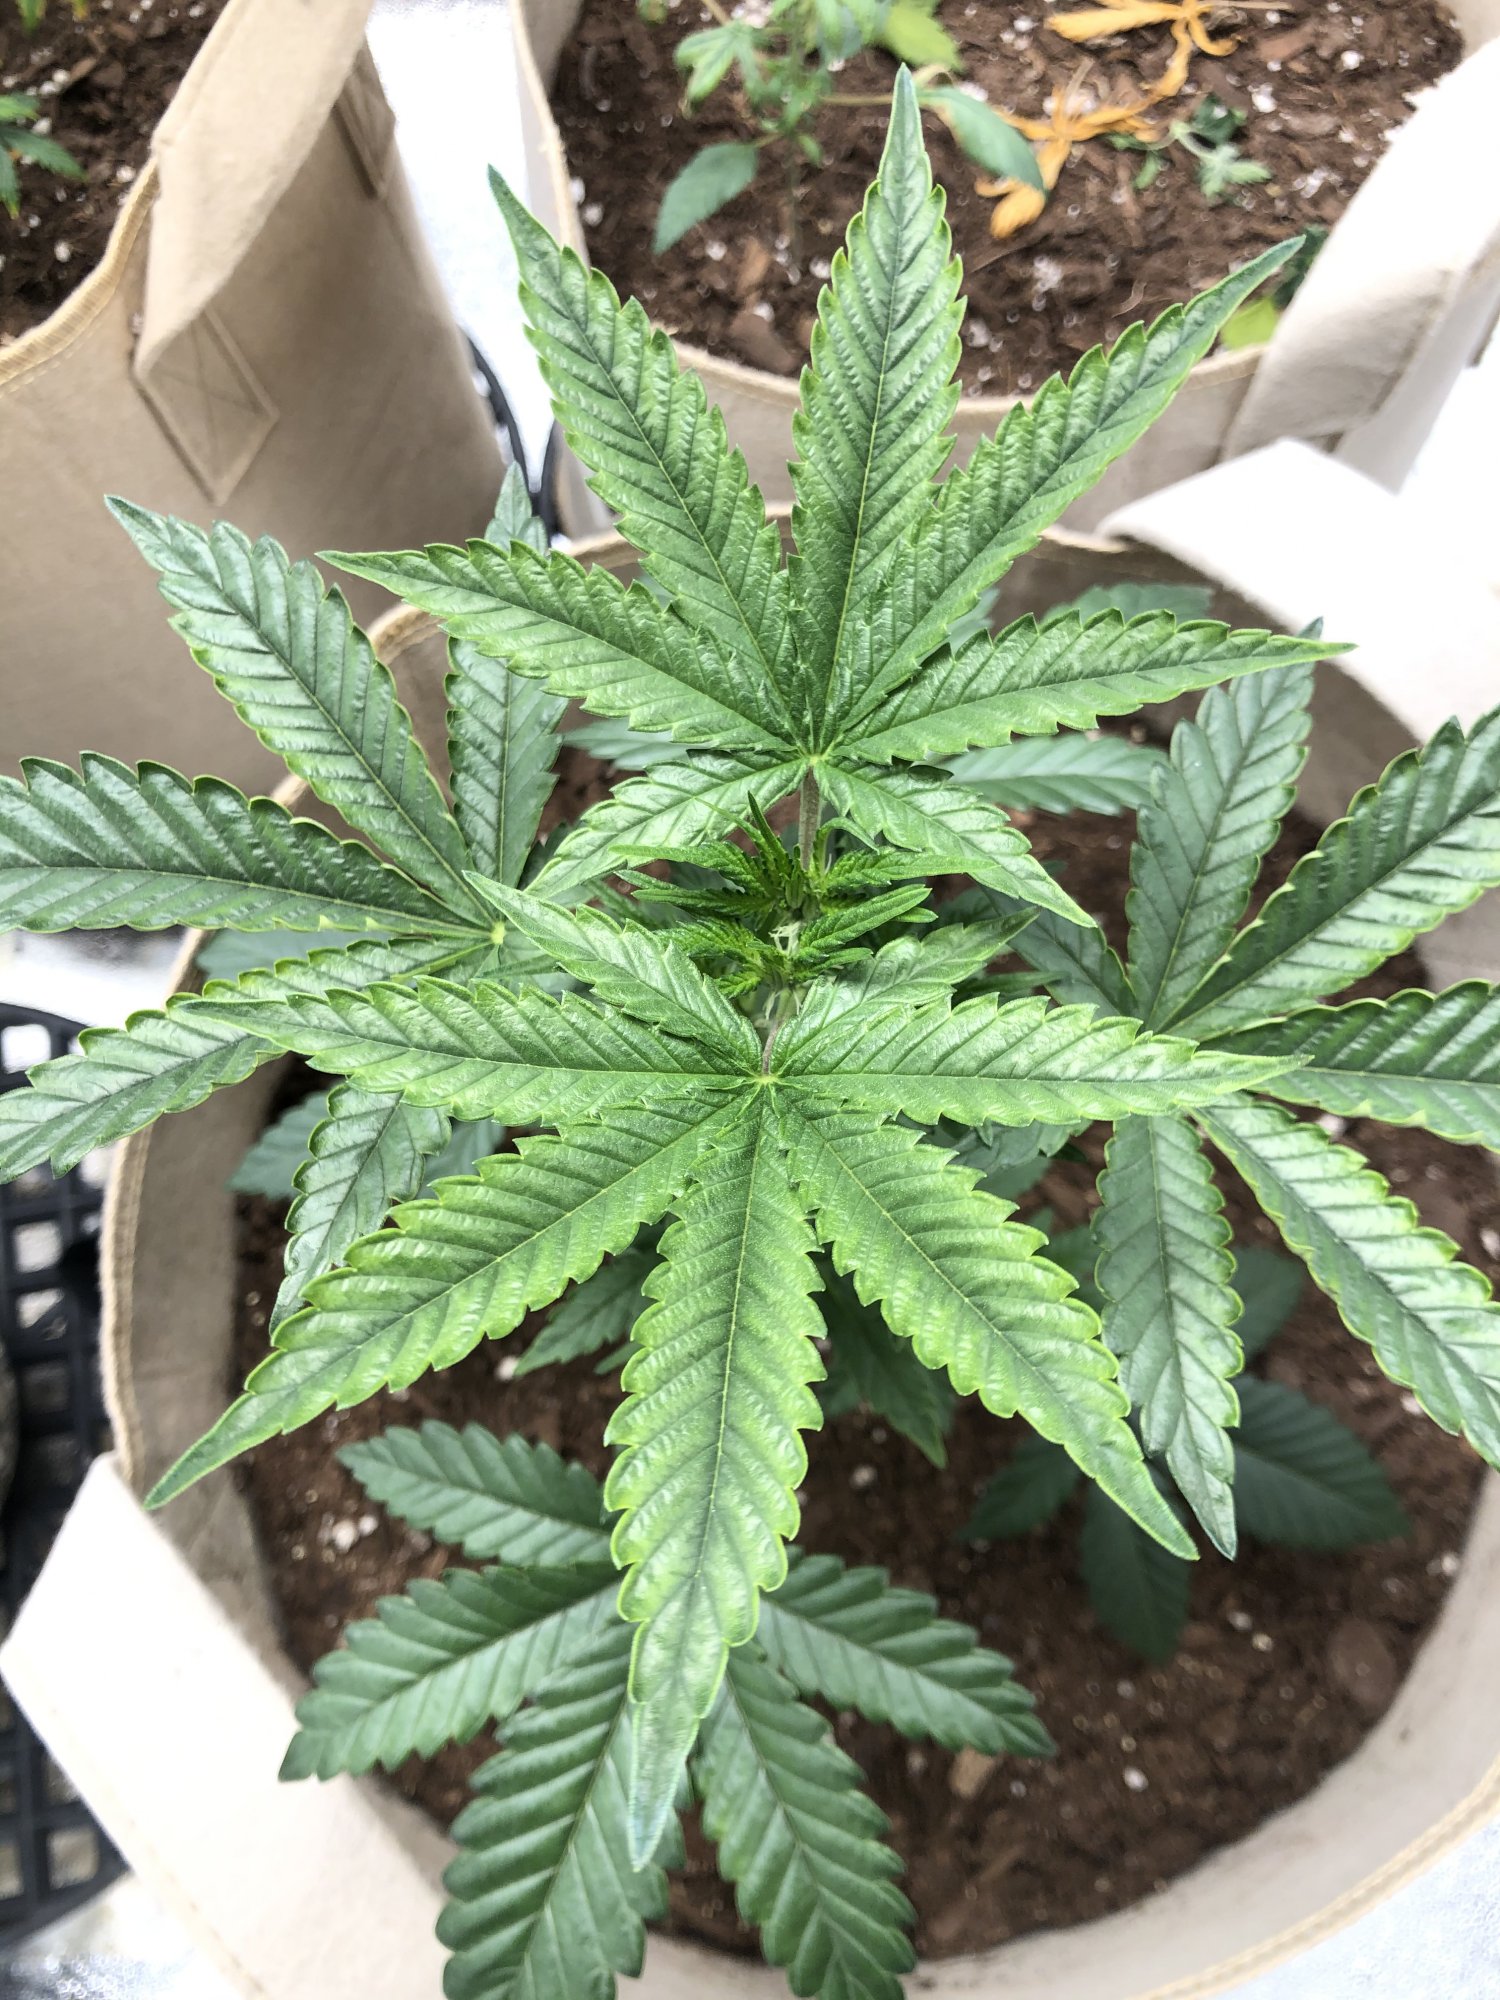 Is this plant showing the deficiencies 3